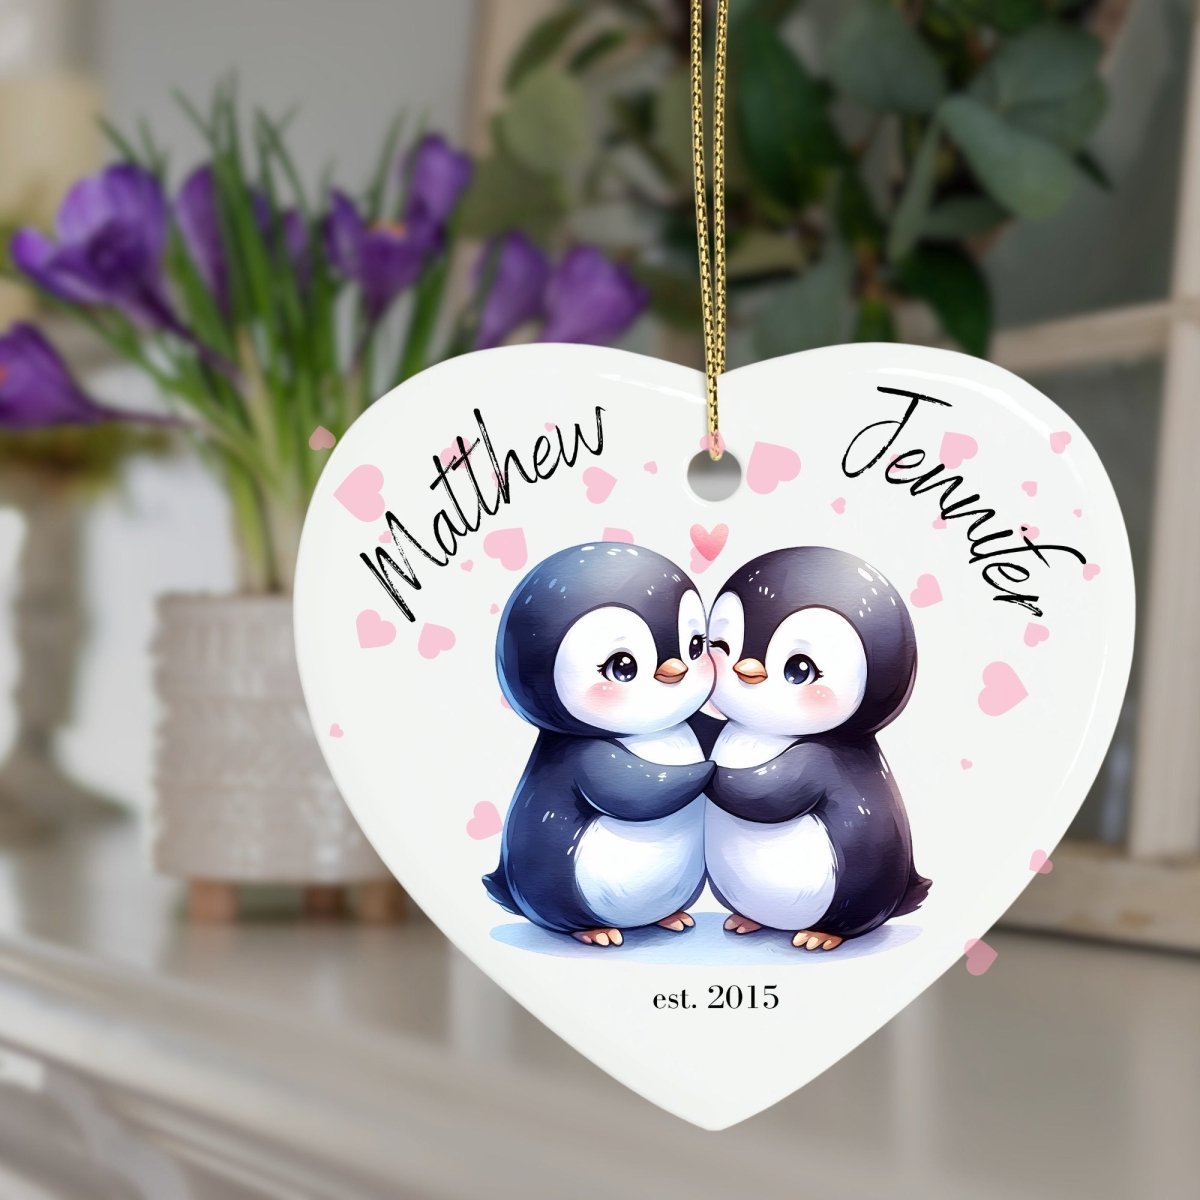 Cute personalised Penguin Couple Ornament Ceramic Heart Ornament Lovers Keepsake Valentines Day Gift Anniversary Gift Idea for Soulmates - Everything Pixel